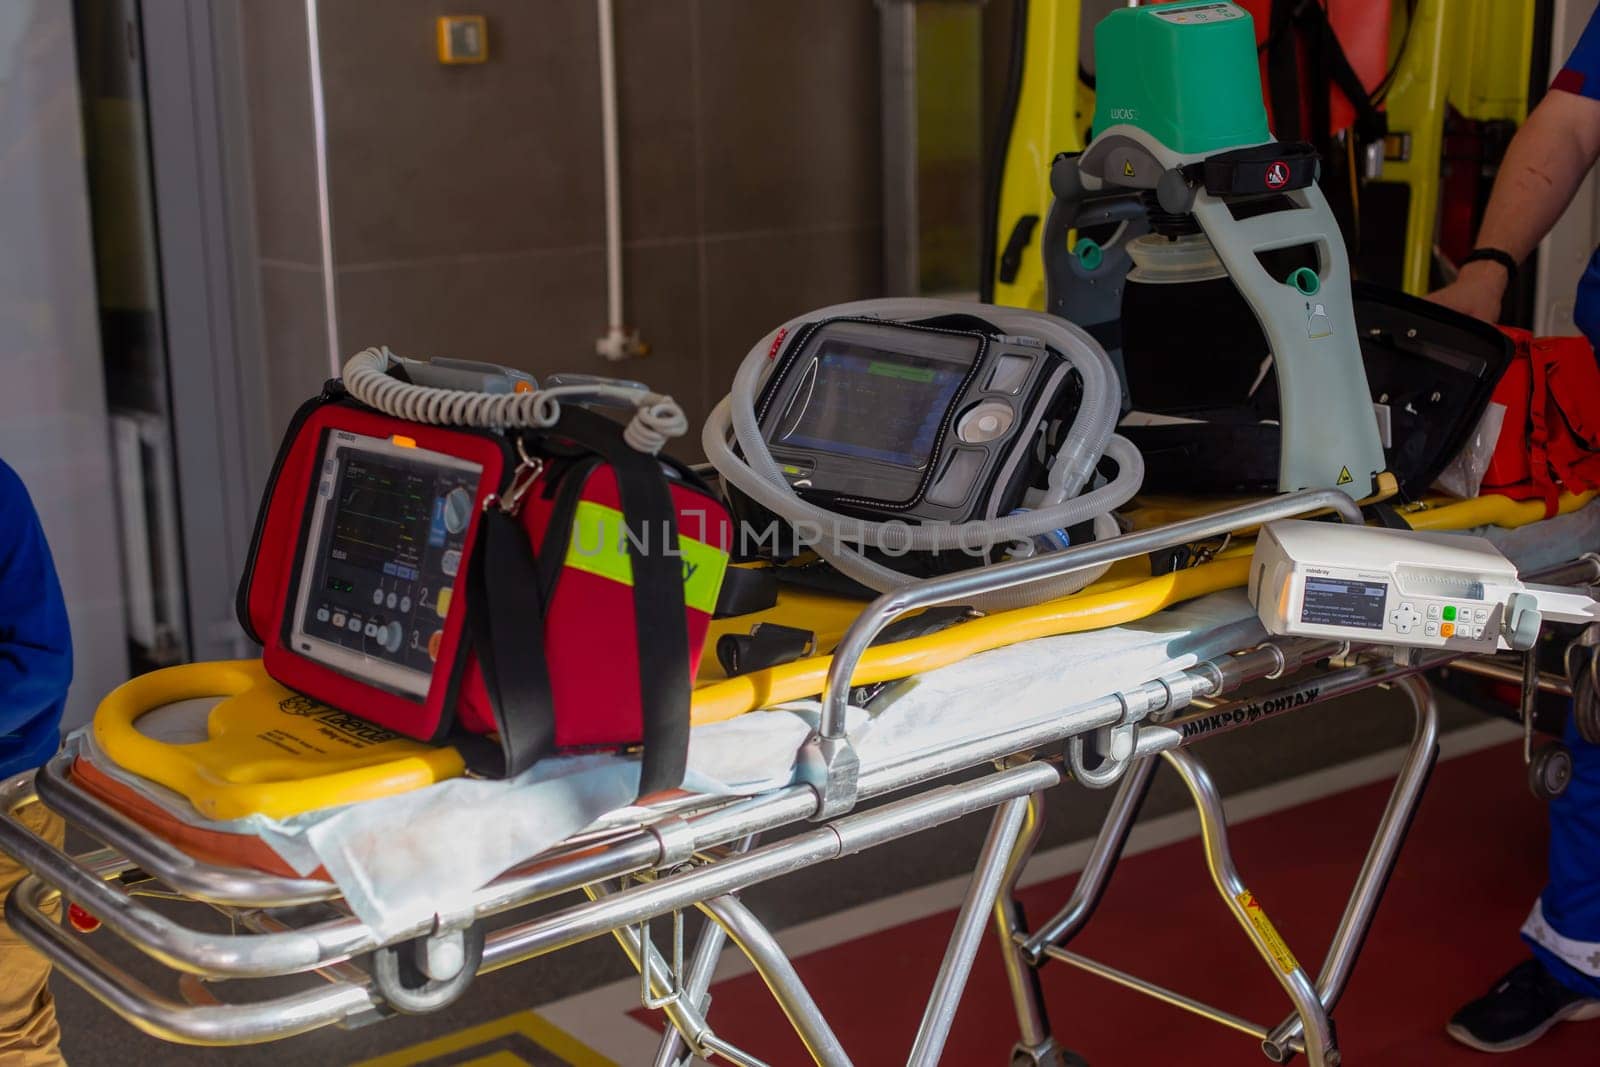 Moscow, Moscow region, Russia - 03.09.2023:Diverse emergency medical devices, including a monitor and a defibrillator, mounted on a stretcher in an ambulance. by Zakharova